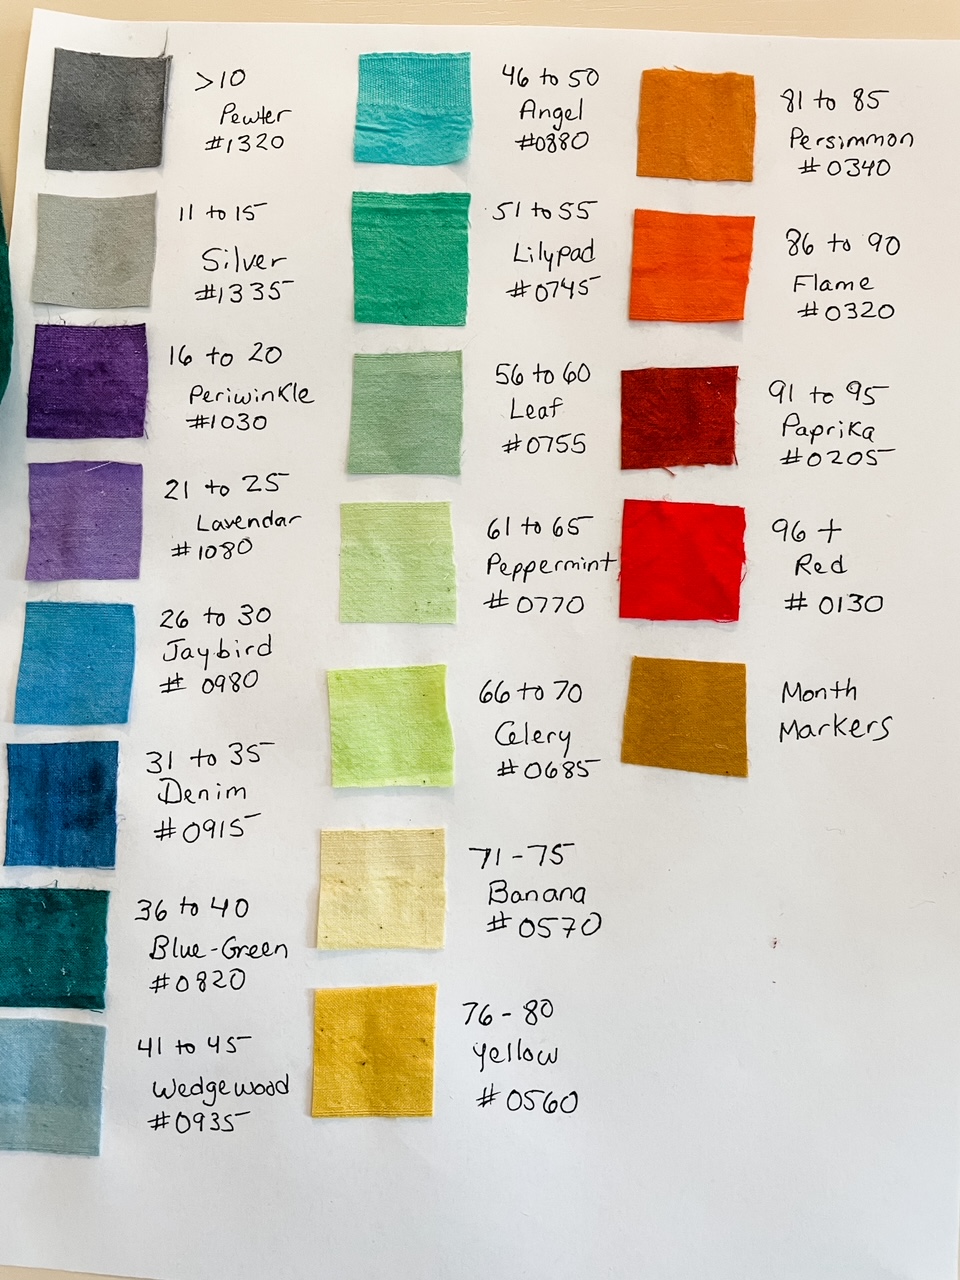 The fabric samples with their dye name and corresponding temperature for placement in the temperature quilt